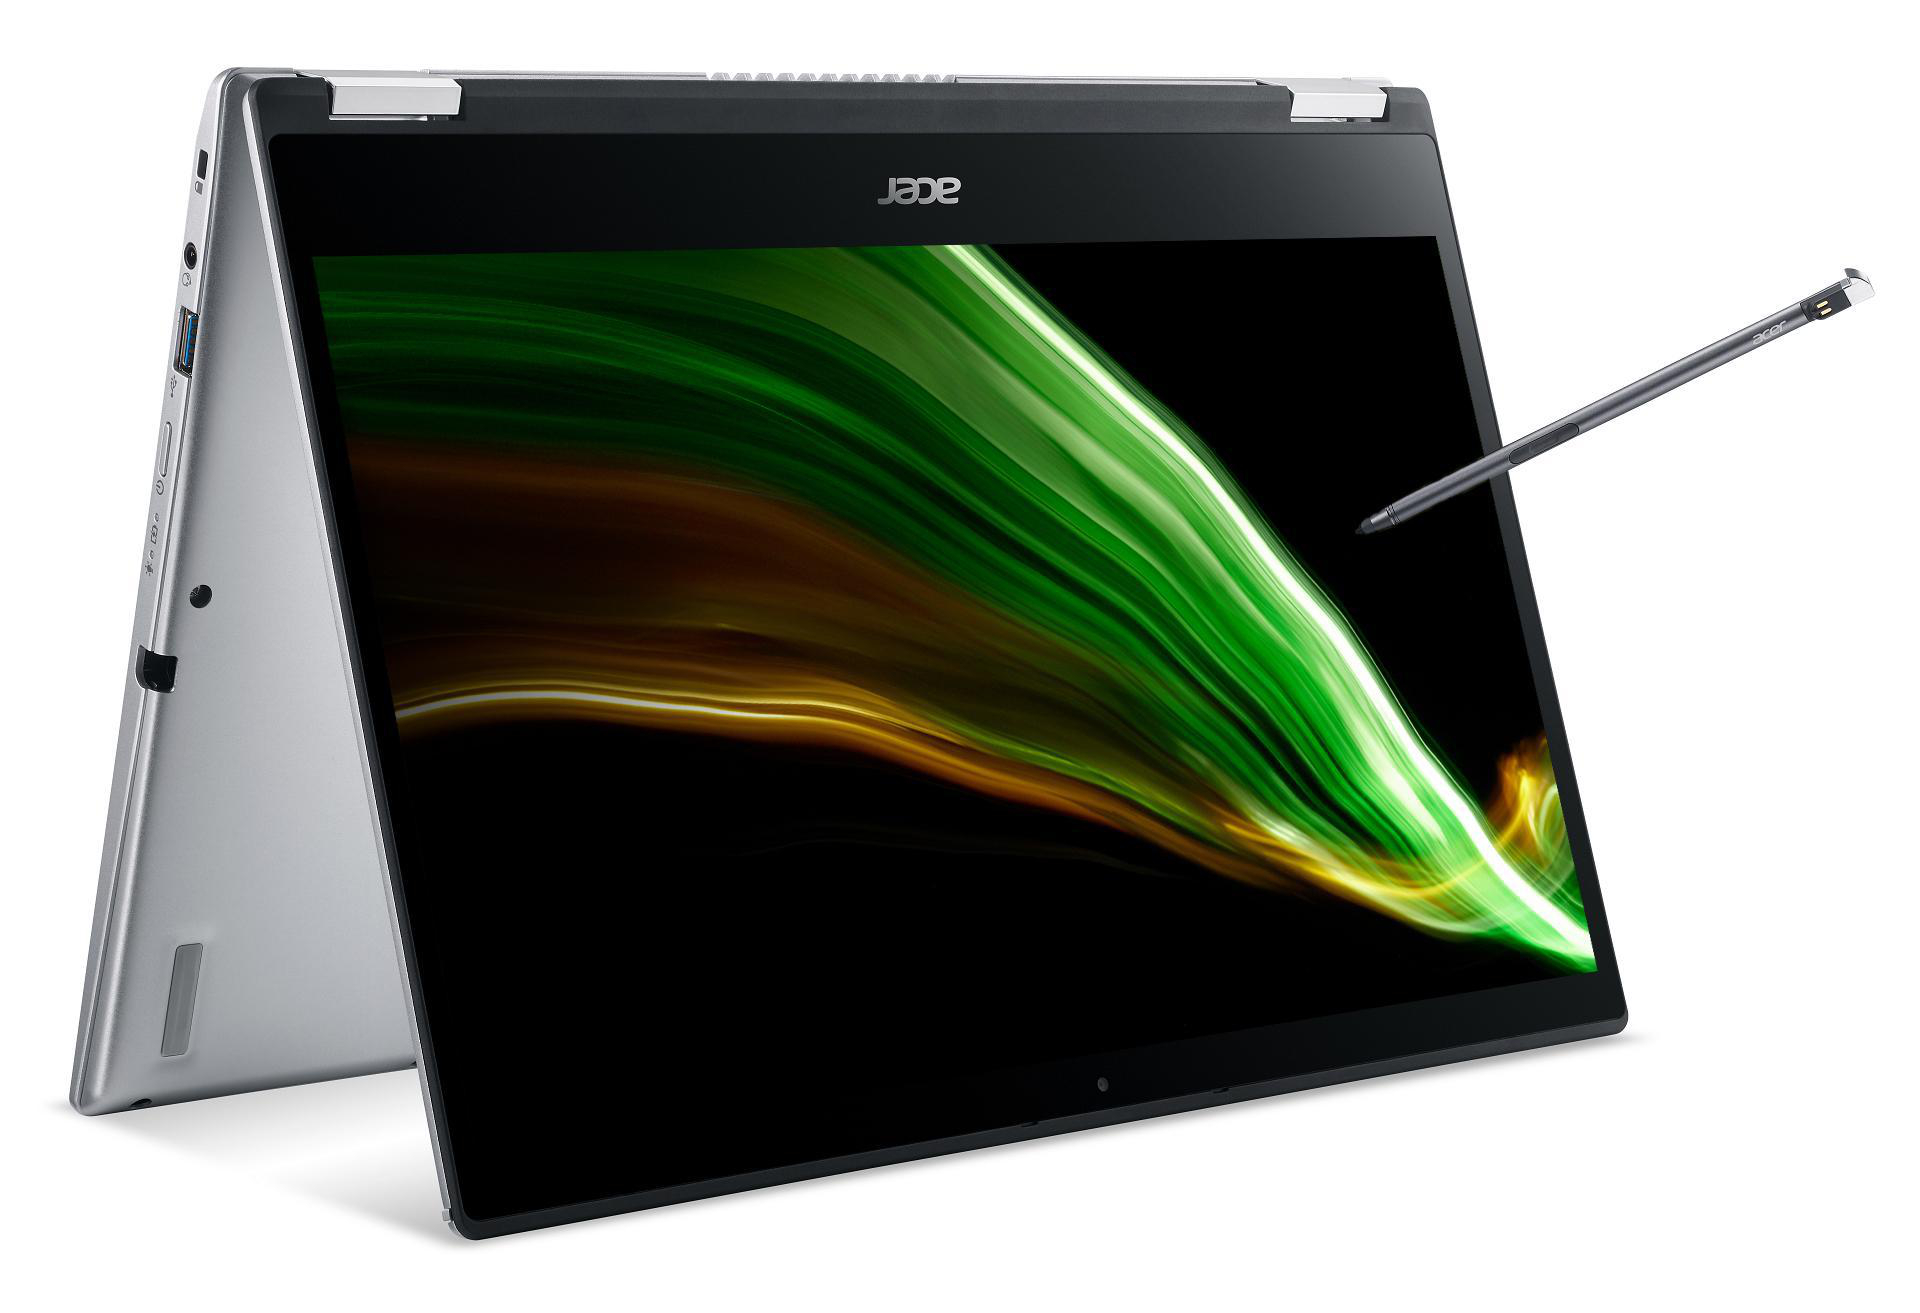 ACER Acer Spin Silber 3 Display Athlon™ (64 AMD, RAM, 128 Bit) Windows Prozessor, Graphics, GB Touchscreen, Silver 10 Notebook, GB Zoll AMD Onboard S-Modus Radeon™ Home mit (SP314-21N-R686), SSD, 14 4